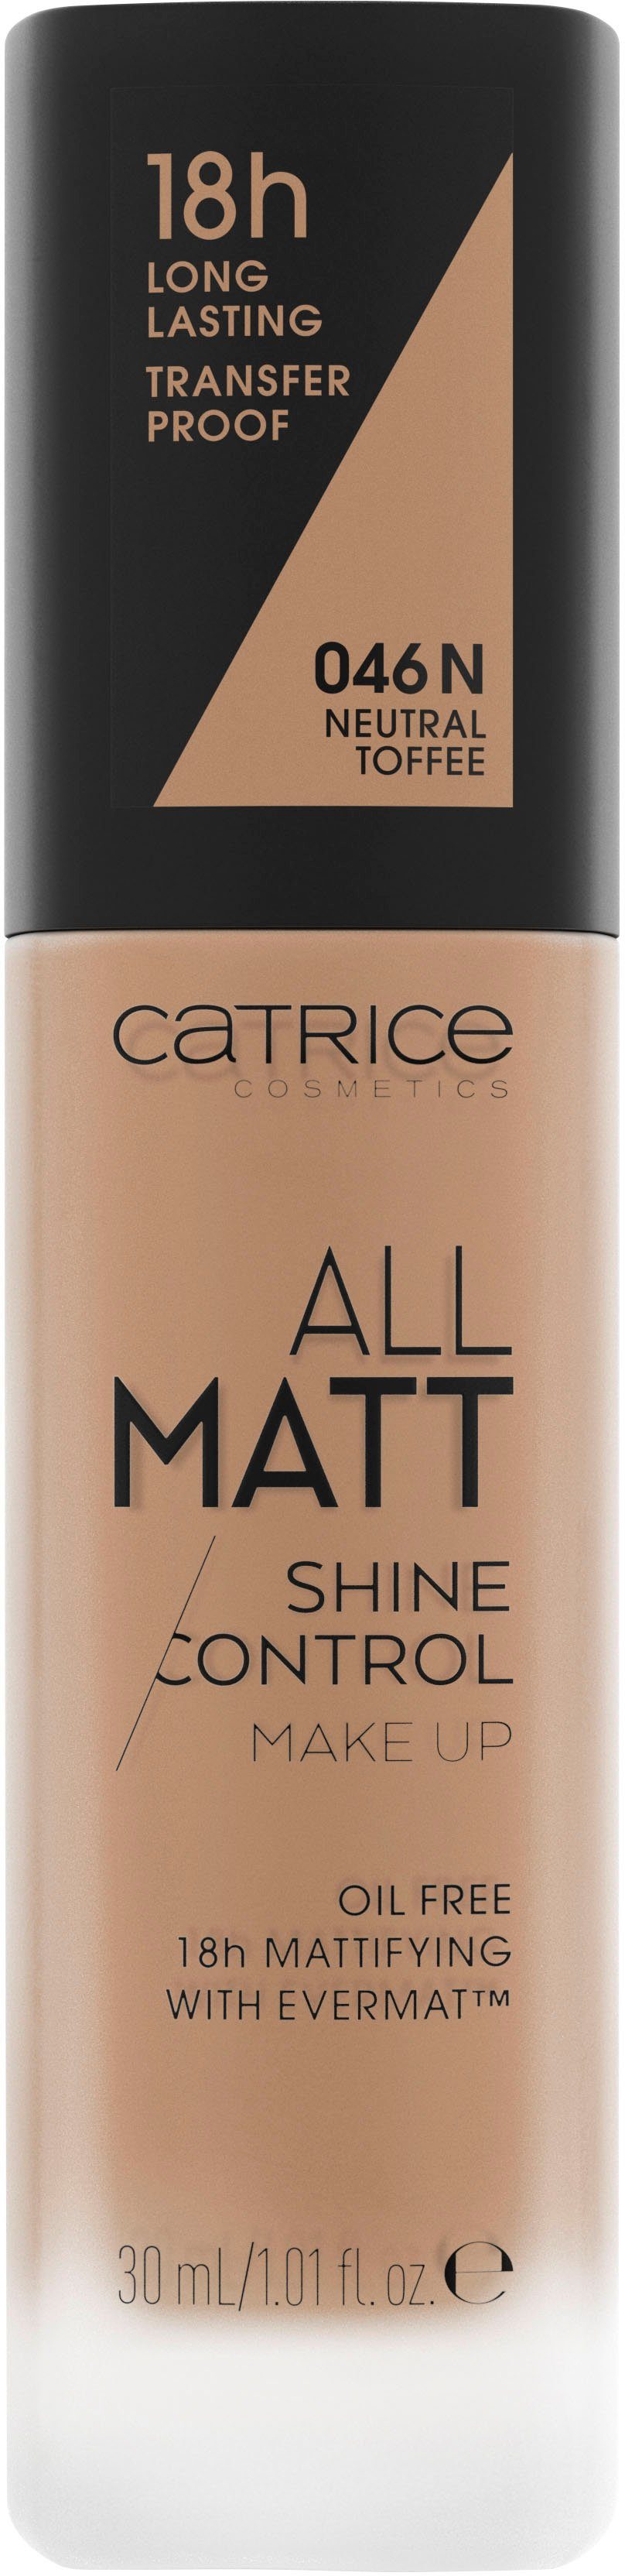 Catrice Matt Foundation Up Shine Make Neutral All Toffee Control